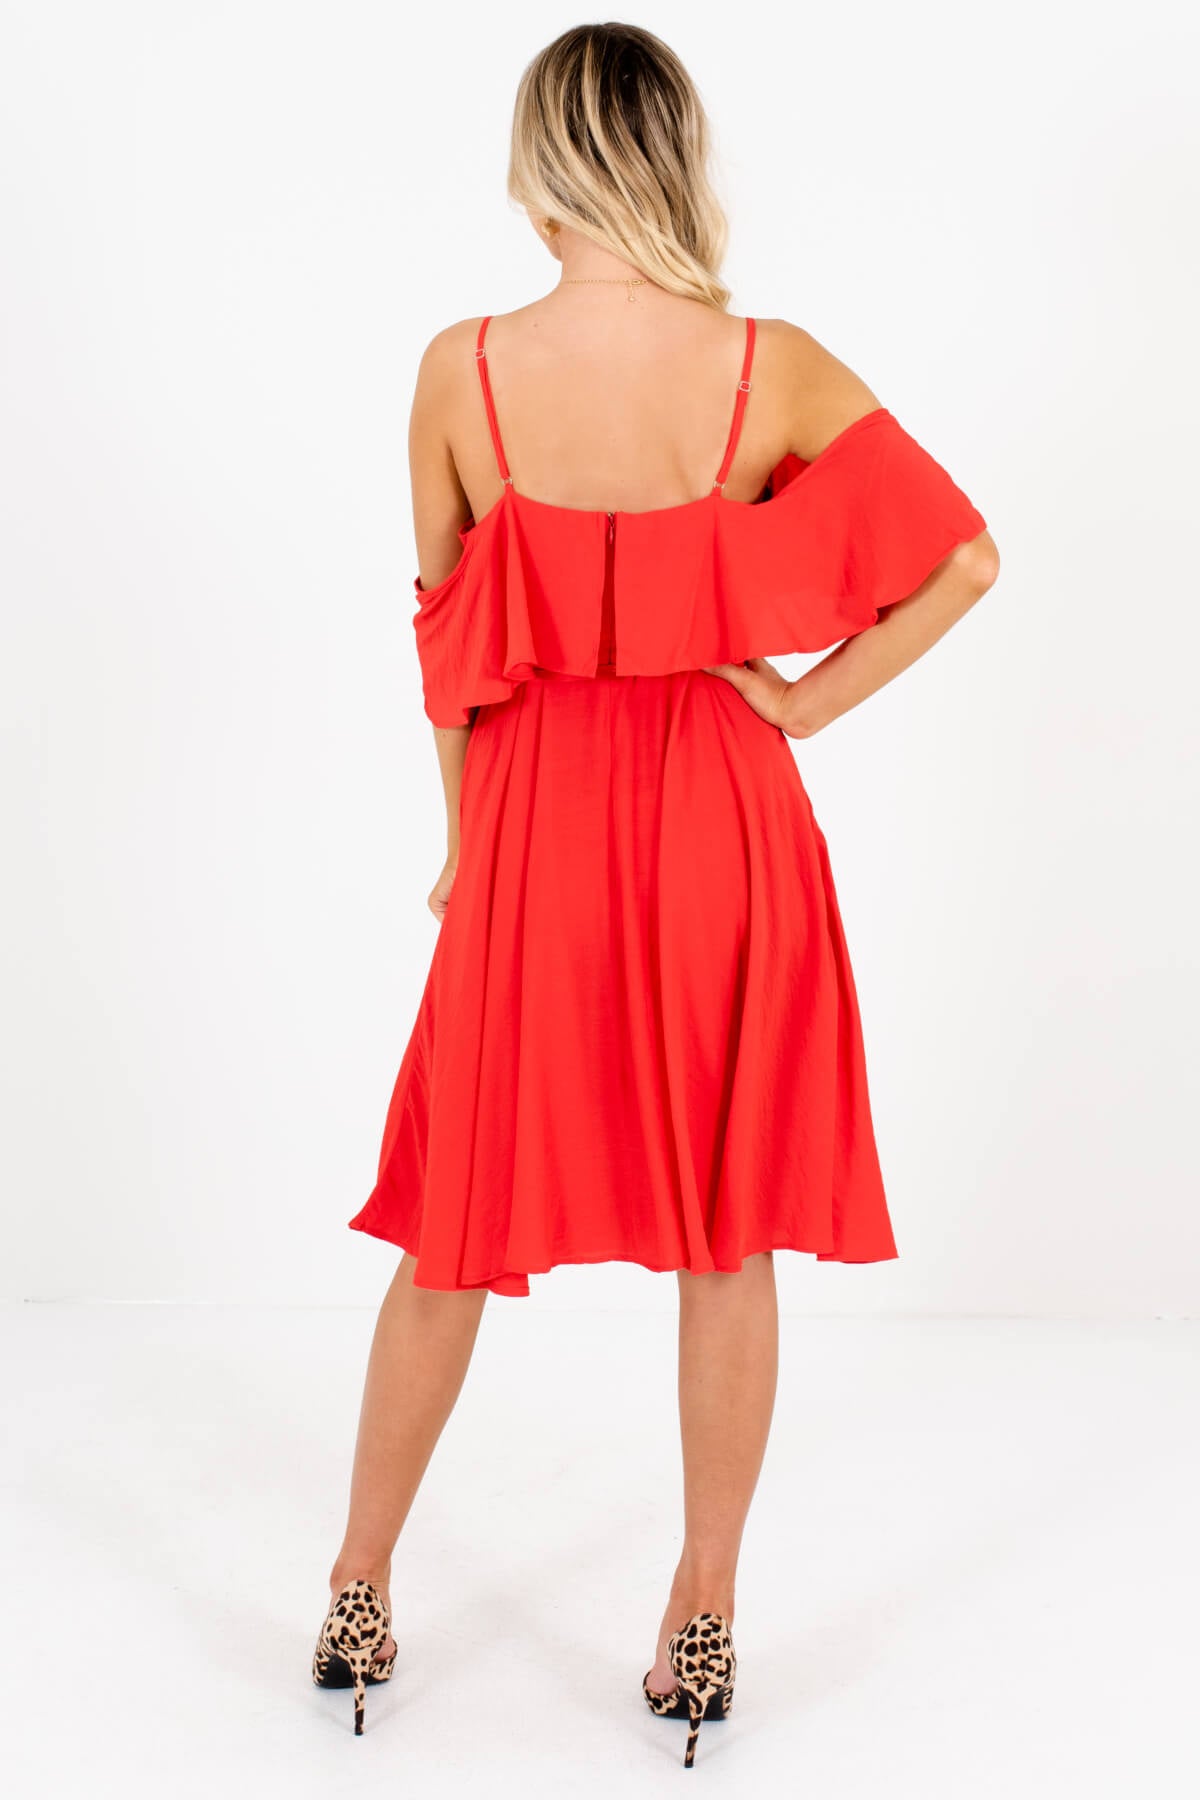 Women's Red Adjustable Spaghetti Strap Boutique Knee-Length Dress